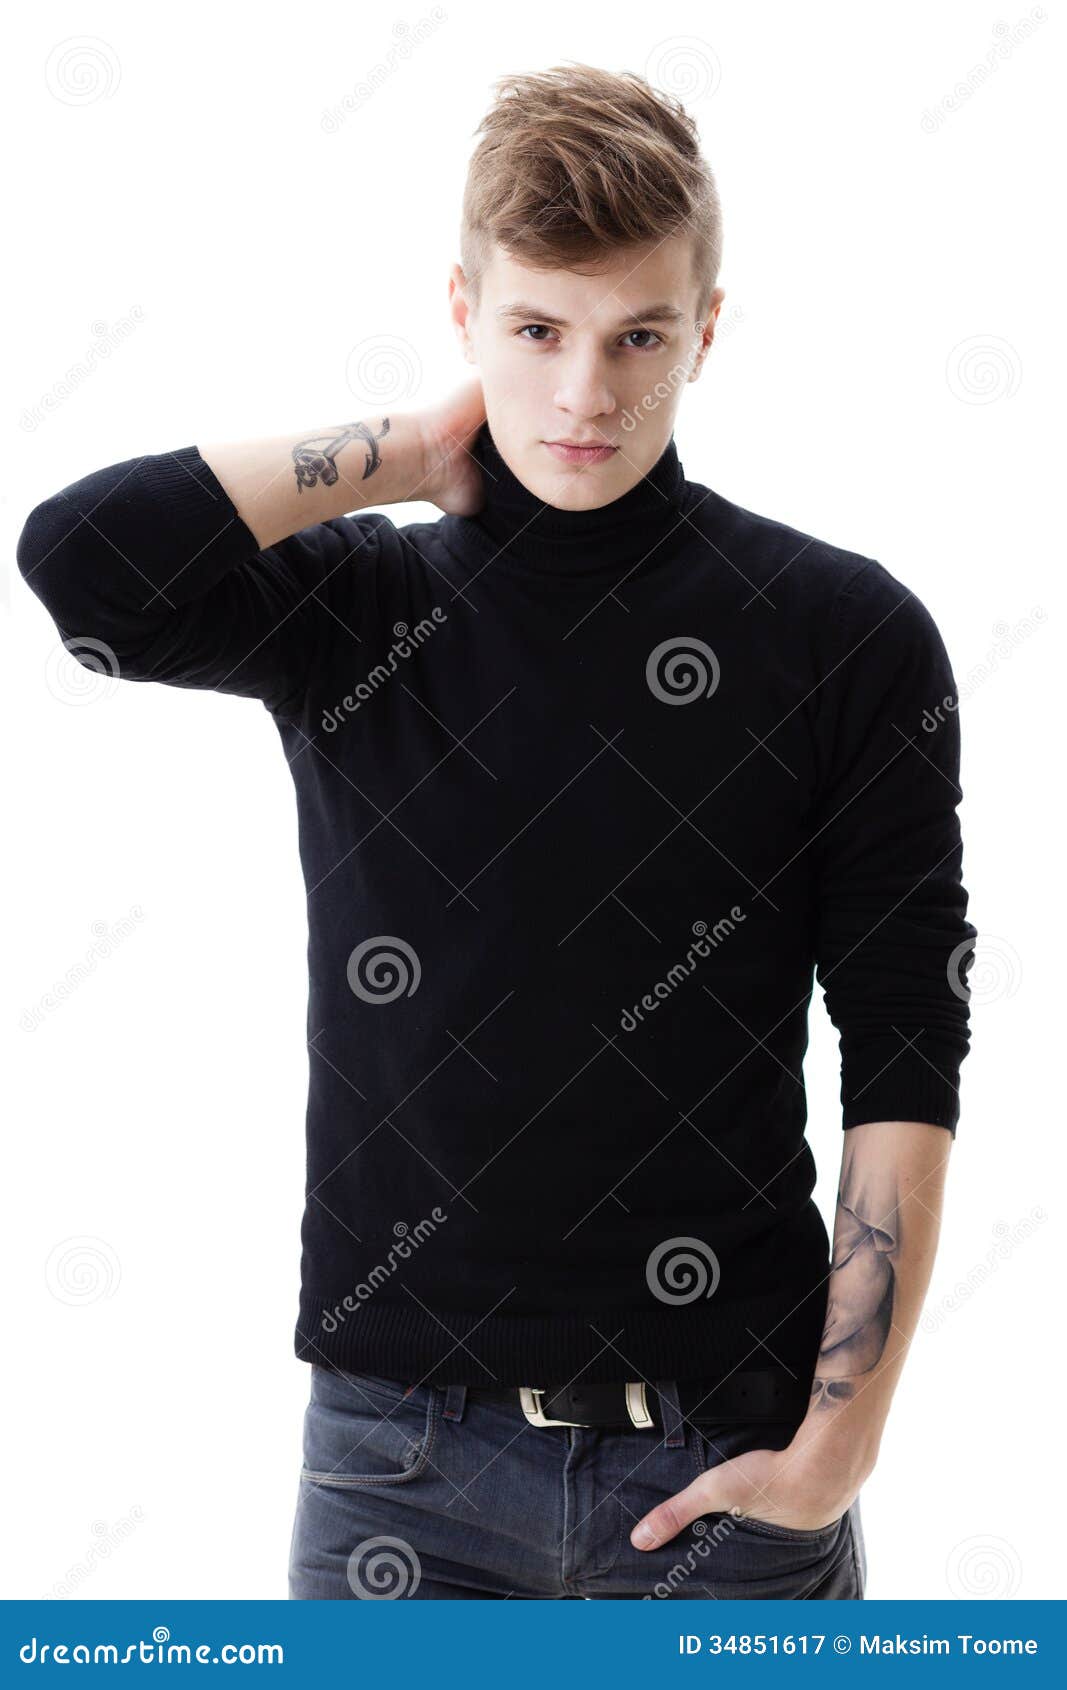 Handsome man stock image. Image of cheerful, handsome 